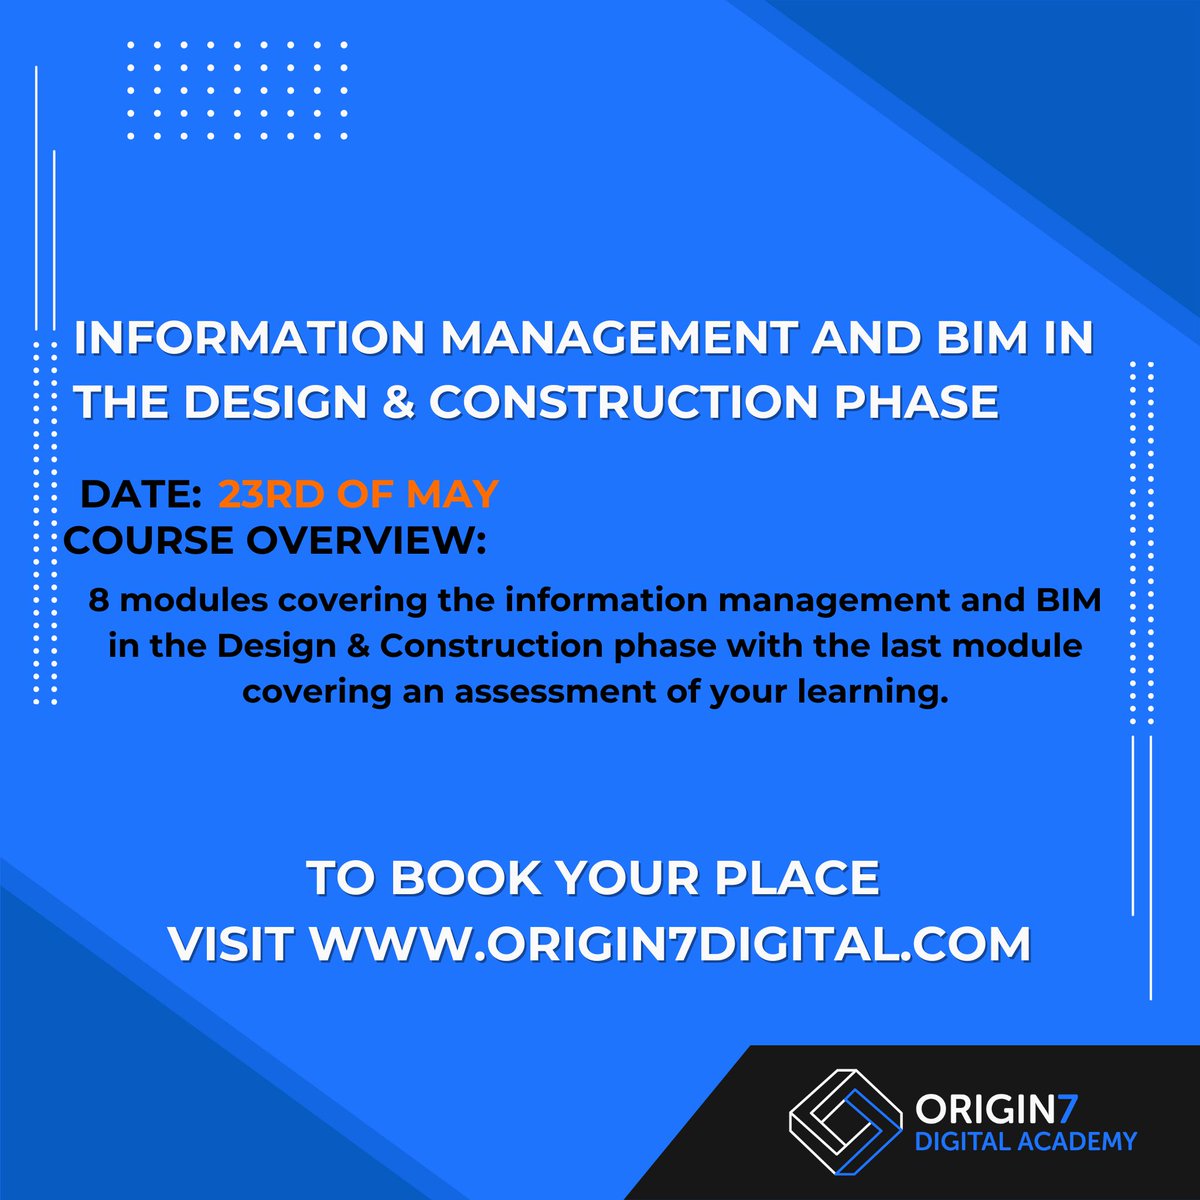 New live training dates now available! 

- 22nd of May: Fundamentals of Information Management & BIM
- 23rd of May: Information Management and BIM in the Design & Construction phase

To book your space visit origin7digital.com

 #bim #construction #informationmanagement